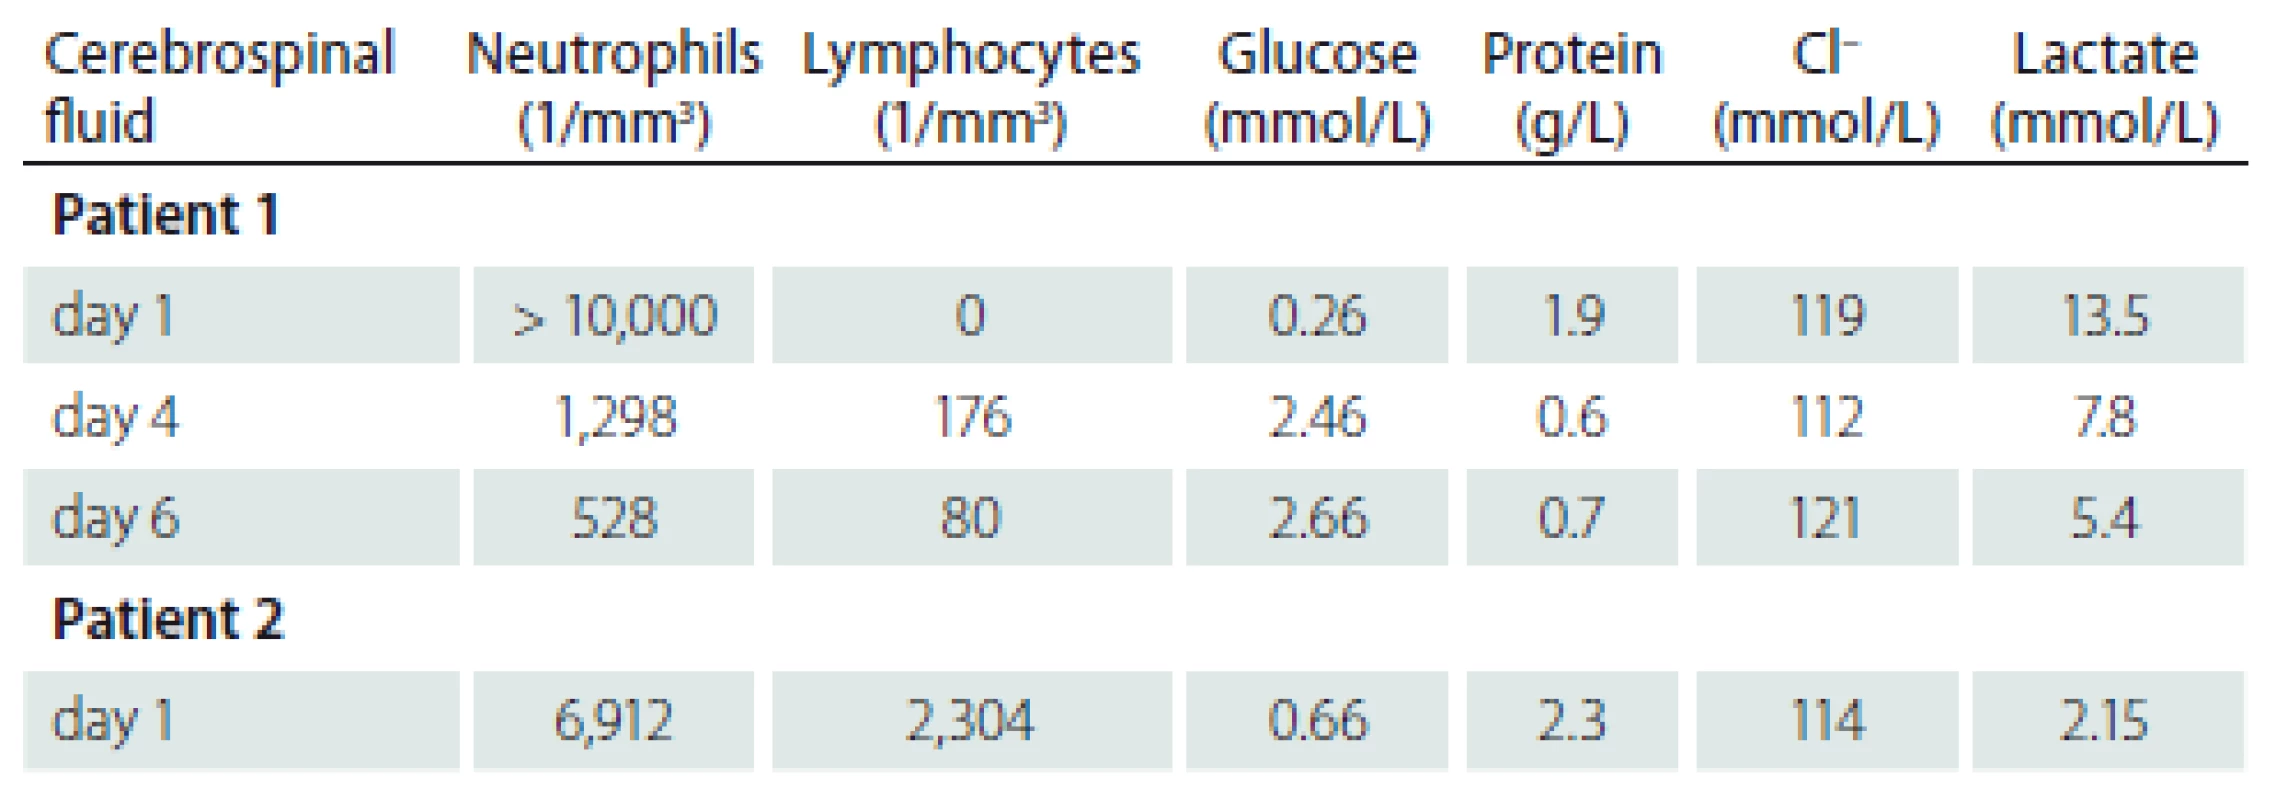 Laboratory findings in cerebrospinal fluid of both patients on the days of hospitalization indicated in the left column.